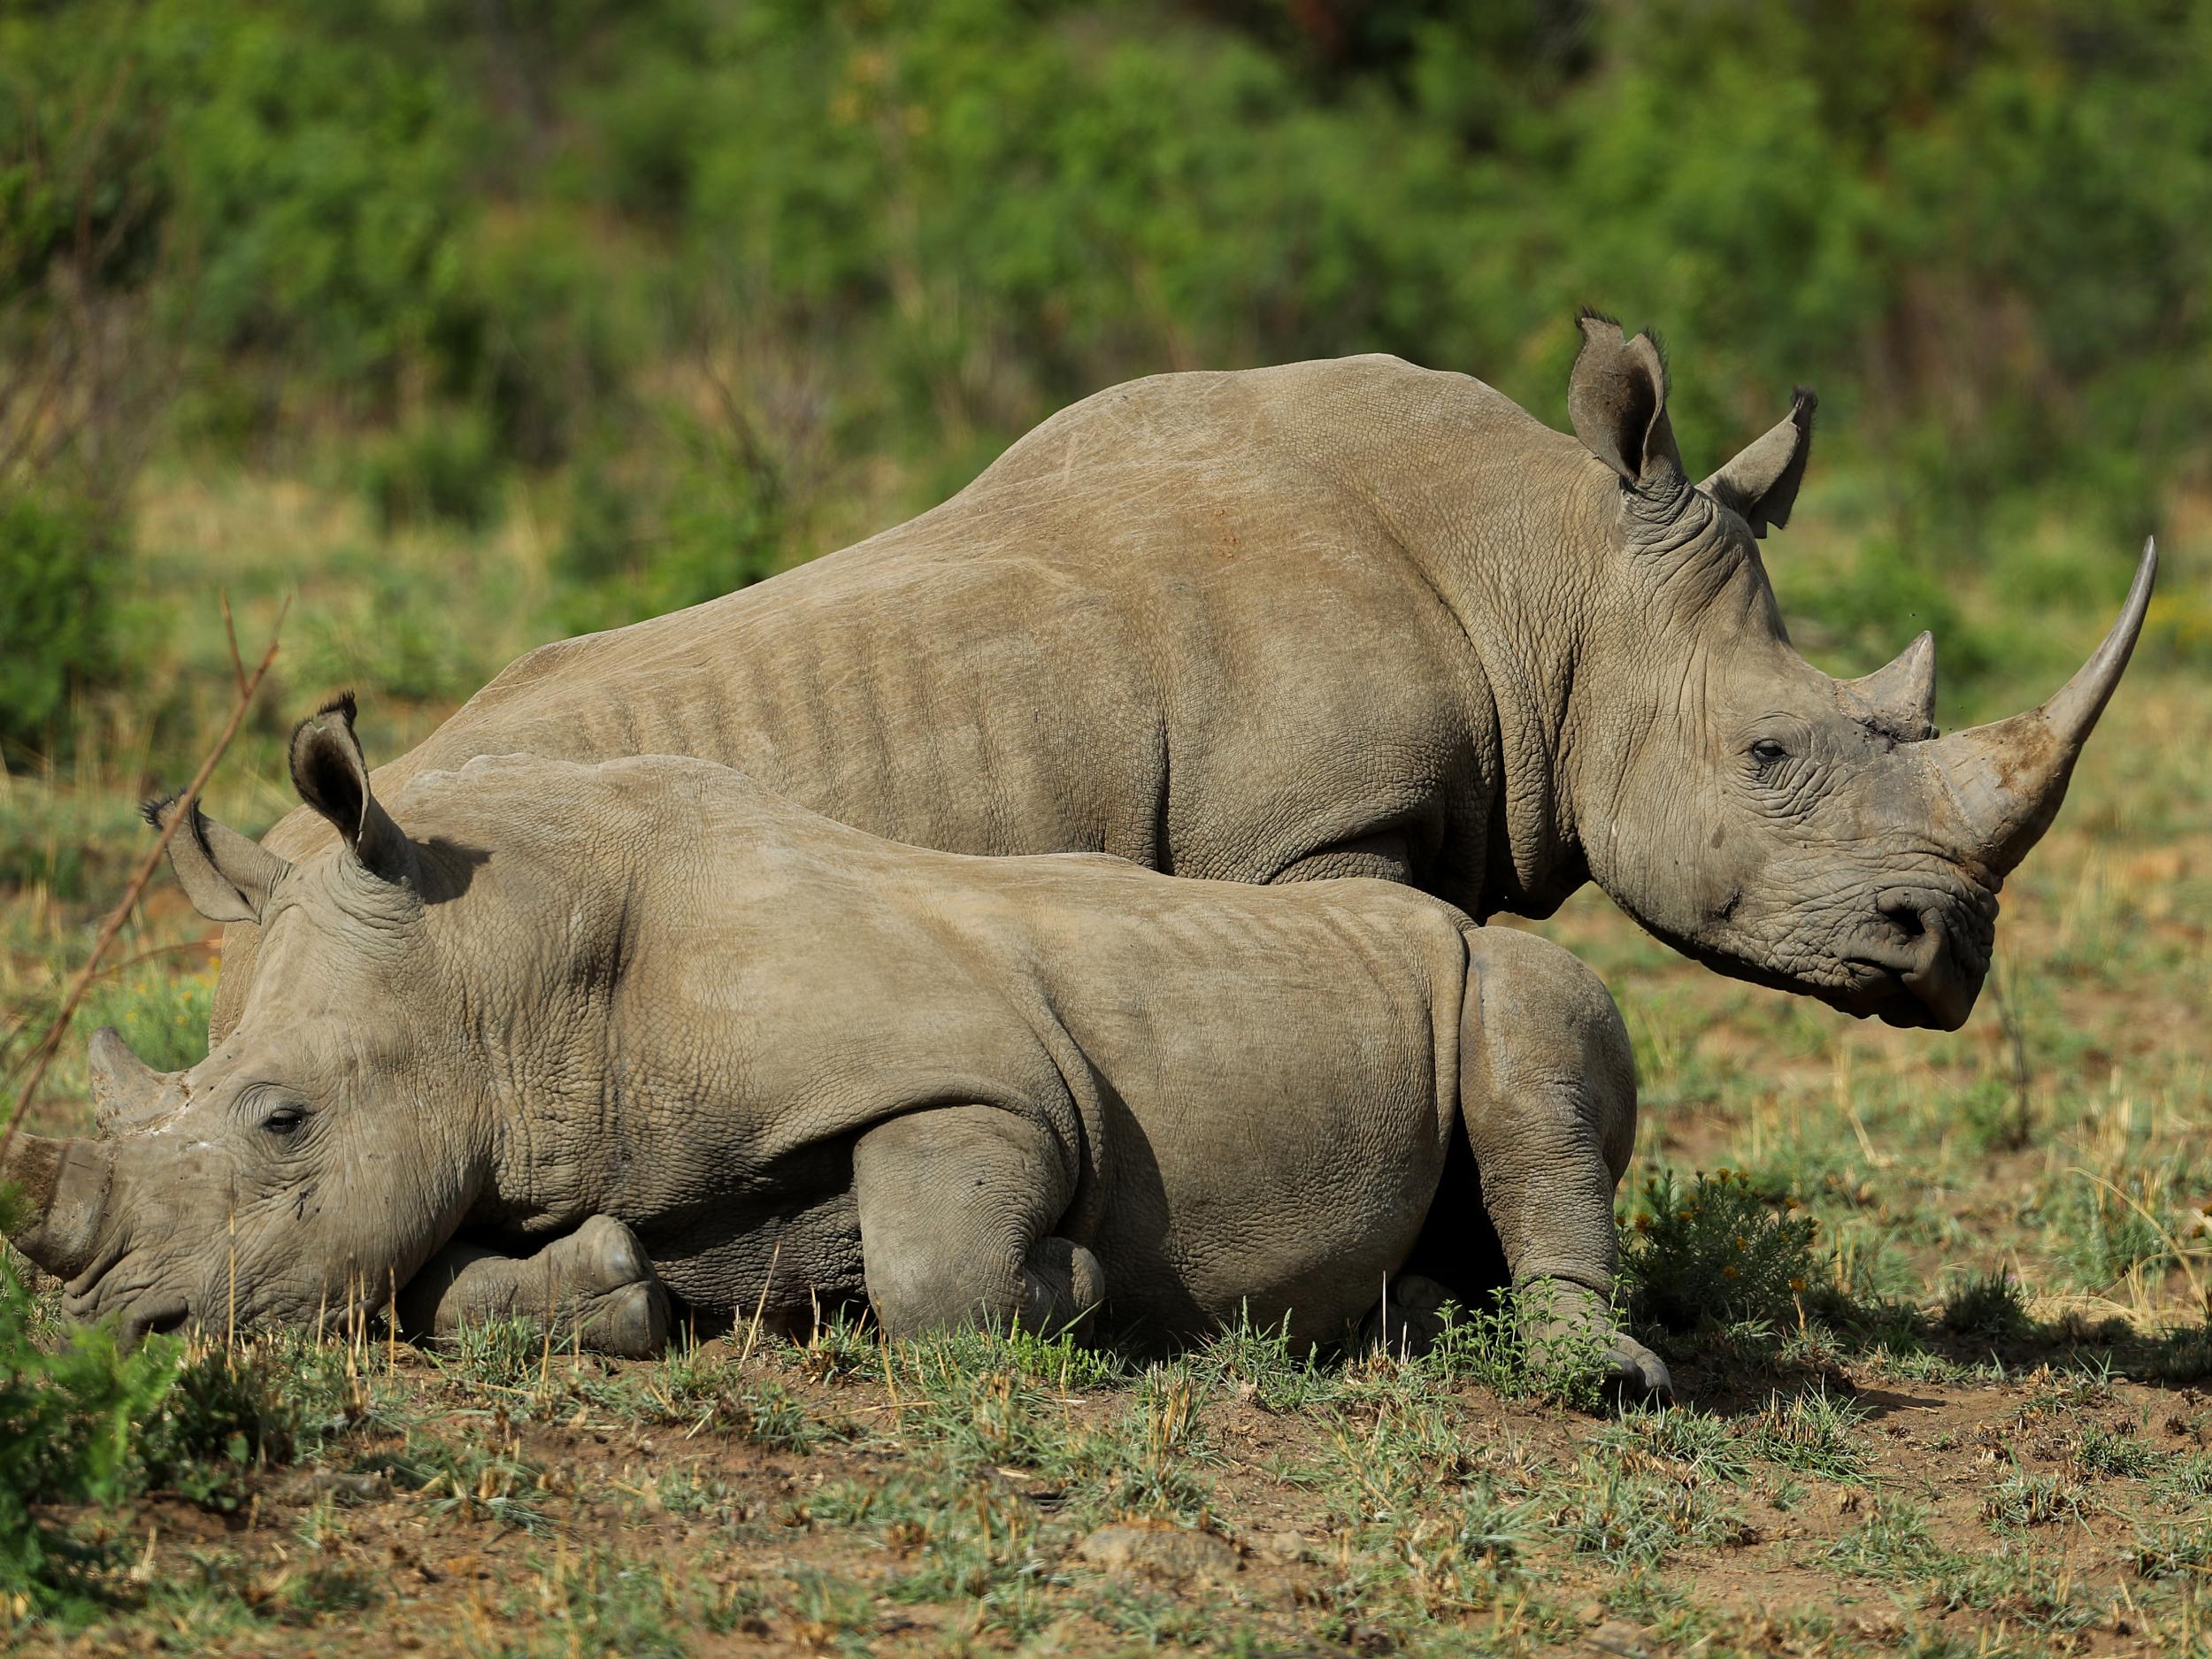 Rhinos are still being killed in significant numbers, despite South African government measures to stop poaching